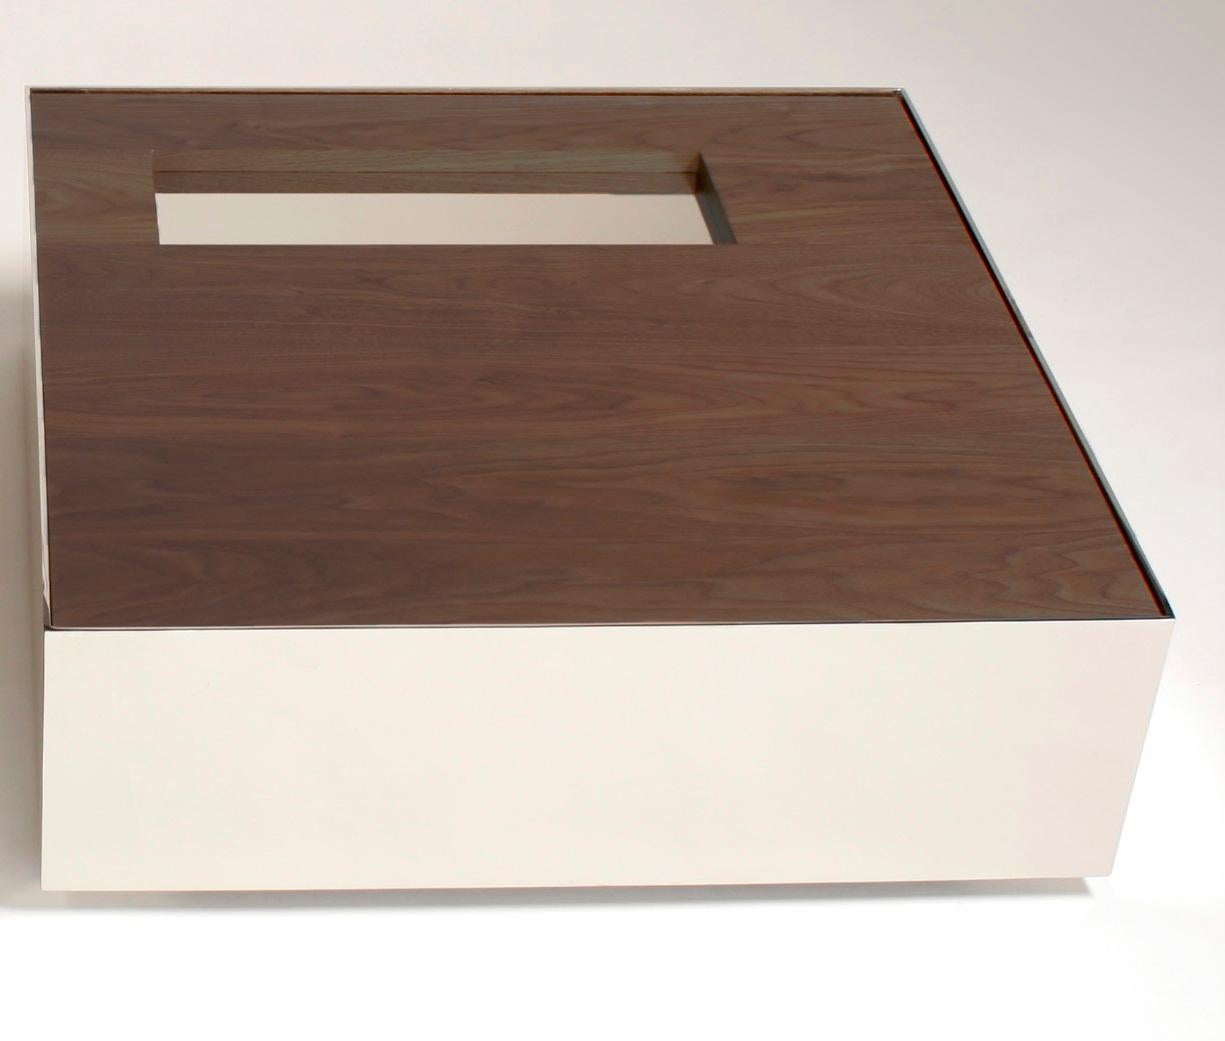 Walnut Ballot Coffee Table by Phase Design
Dimensions: D 76,2 x W 76,2 x H 25,4 cm.
Materials: Walnut and white powder-coated metal.

Steel coffee table with solid wood top, available in walnut, white oak, or ebonized oak. Available in polished